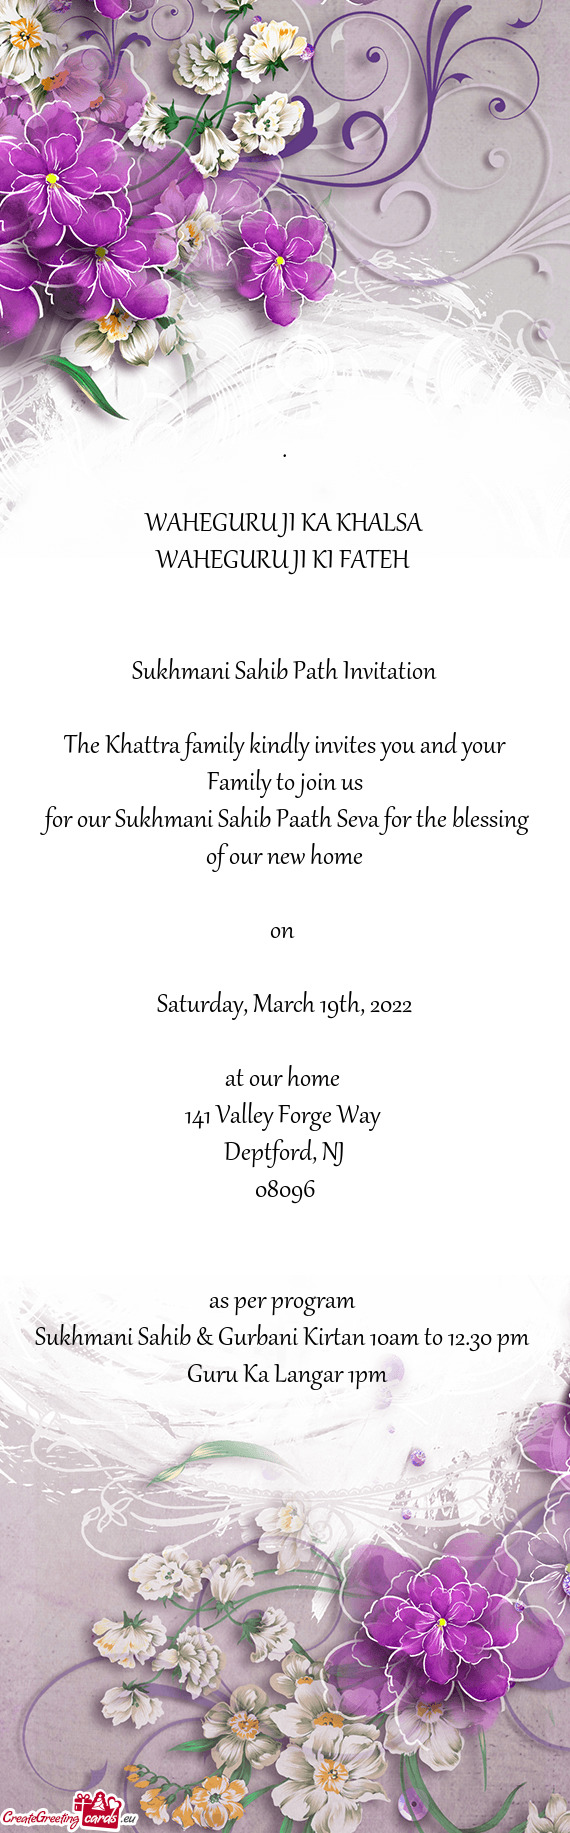 The Khattra family kindly invites you and your Family to join us